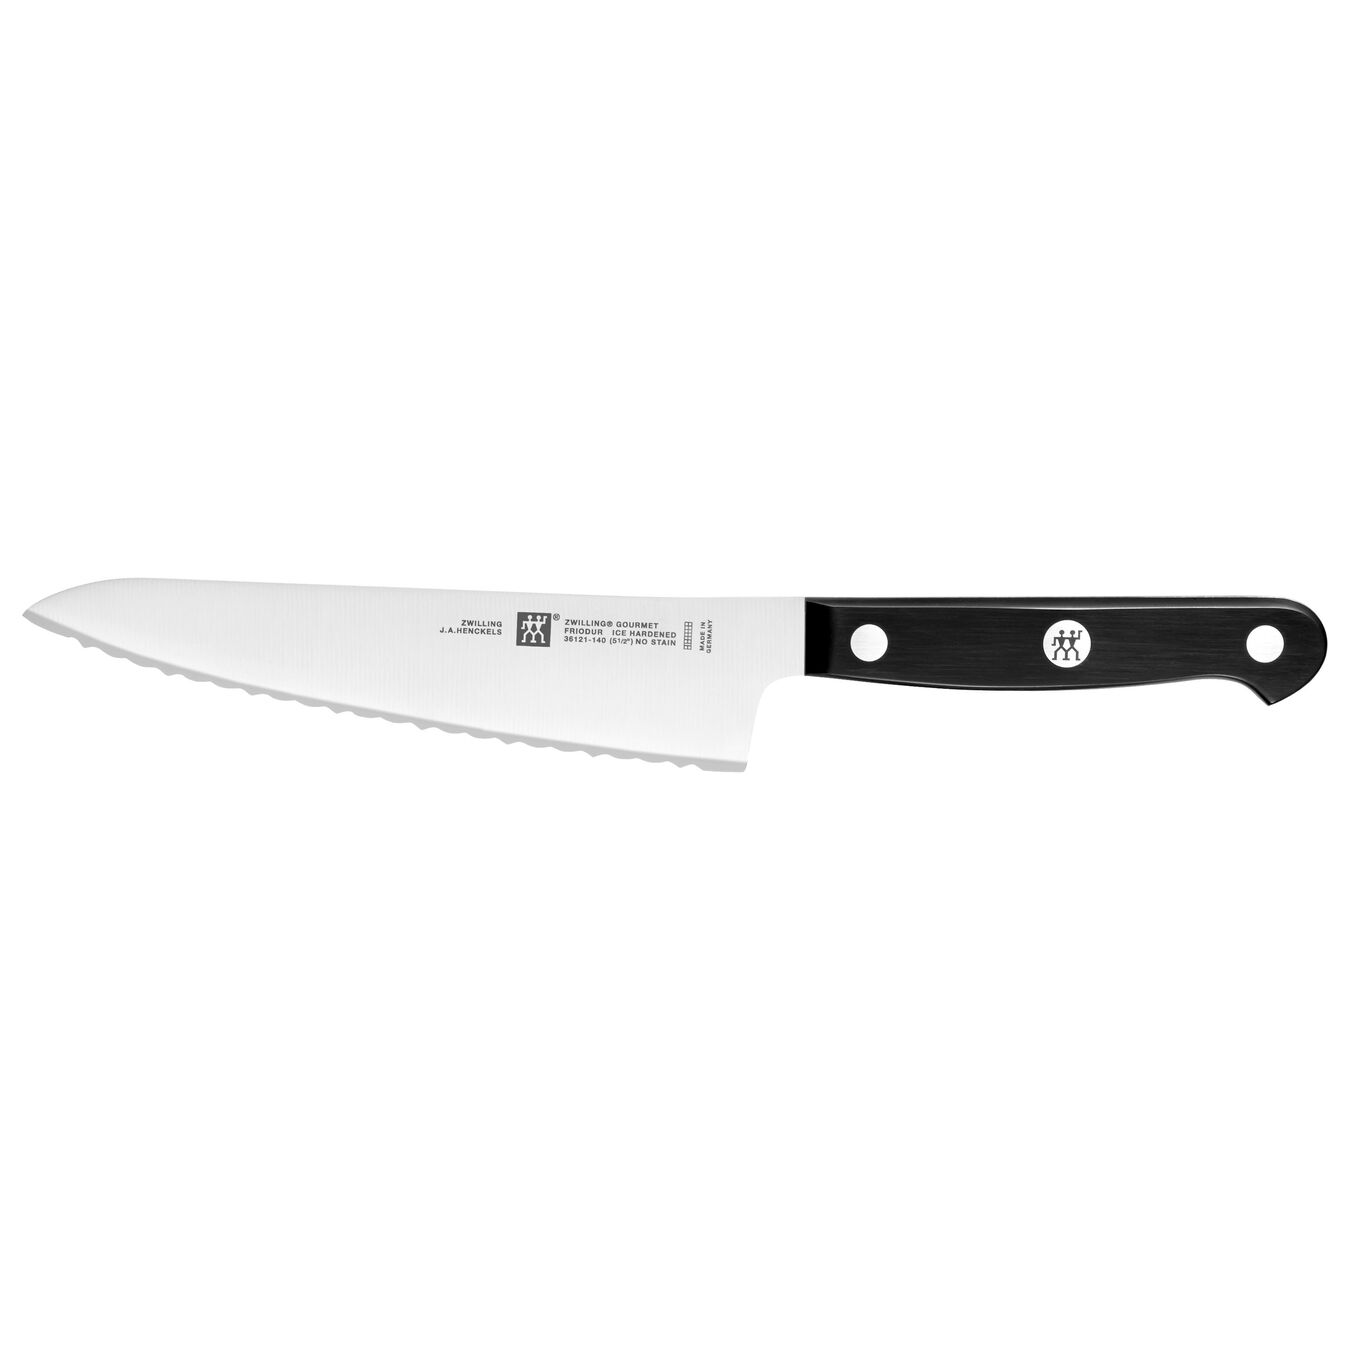 serated knife with riveted black handle on white background